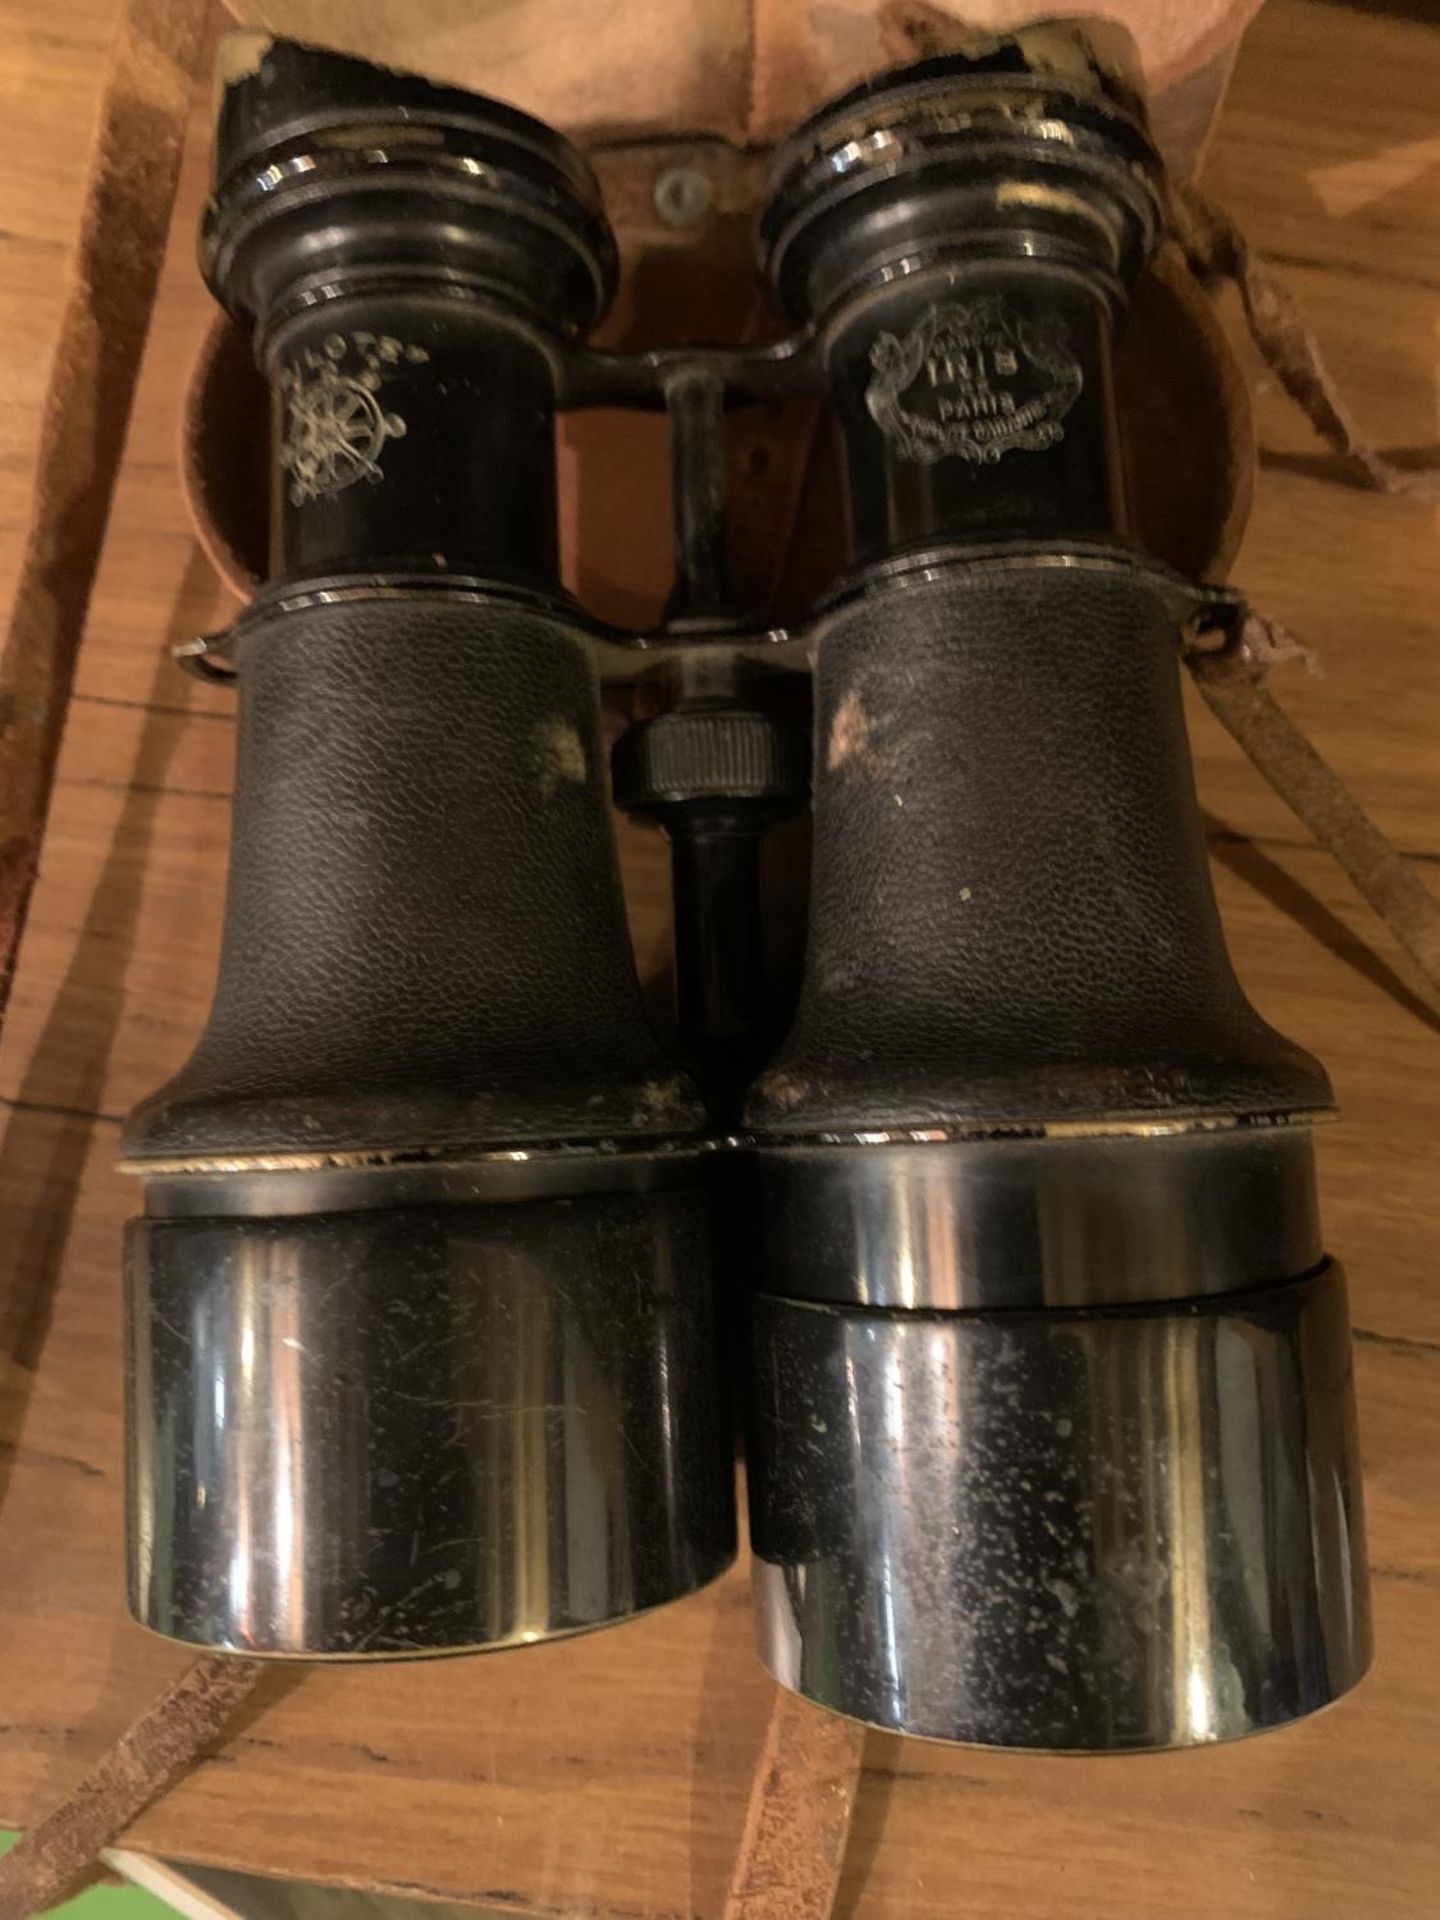 A PAIR OF EARLY 20TH CENTURY PILOTE BINOCULARS BY IRIS DE PARIS WITH LEATHER CASE - Image 2 of 5